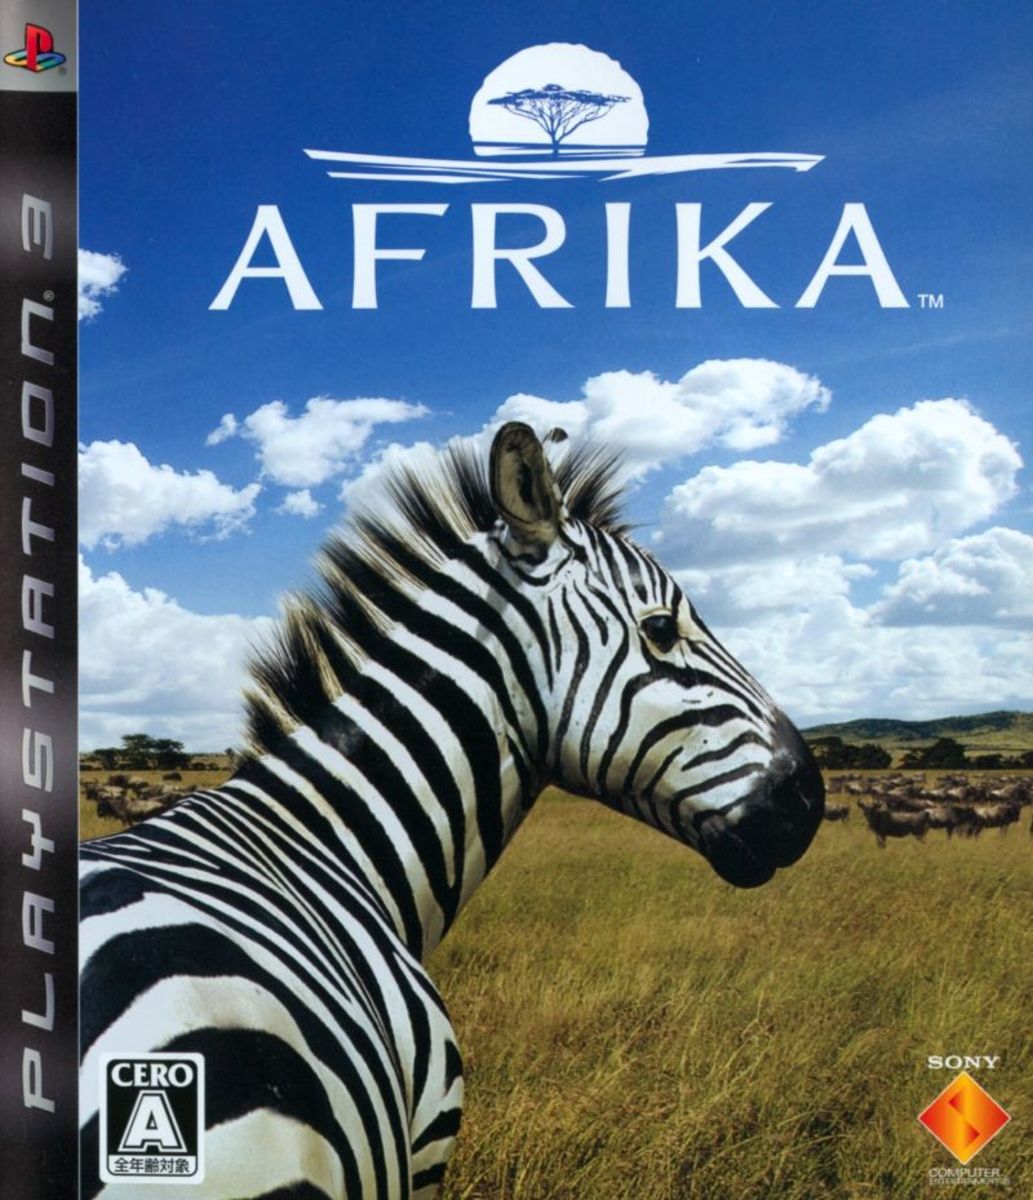 Afrika offers a non-violent, relaxing gaming experience for mature gamers